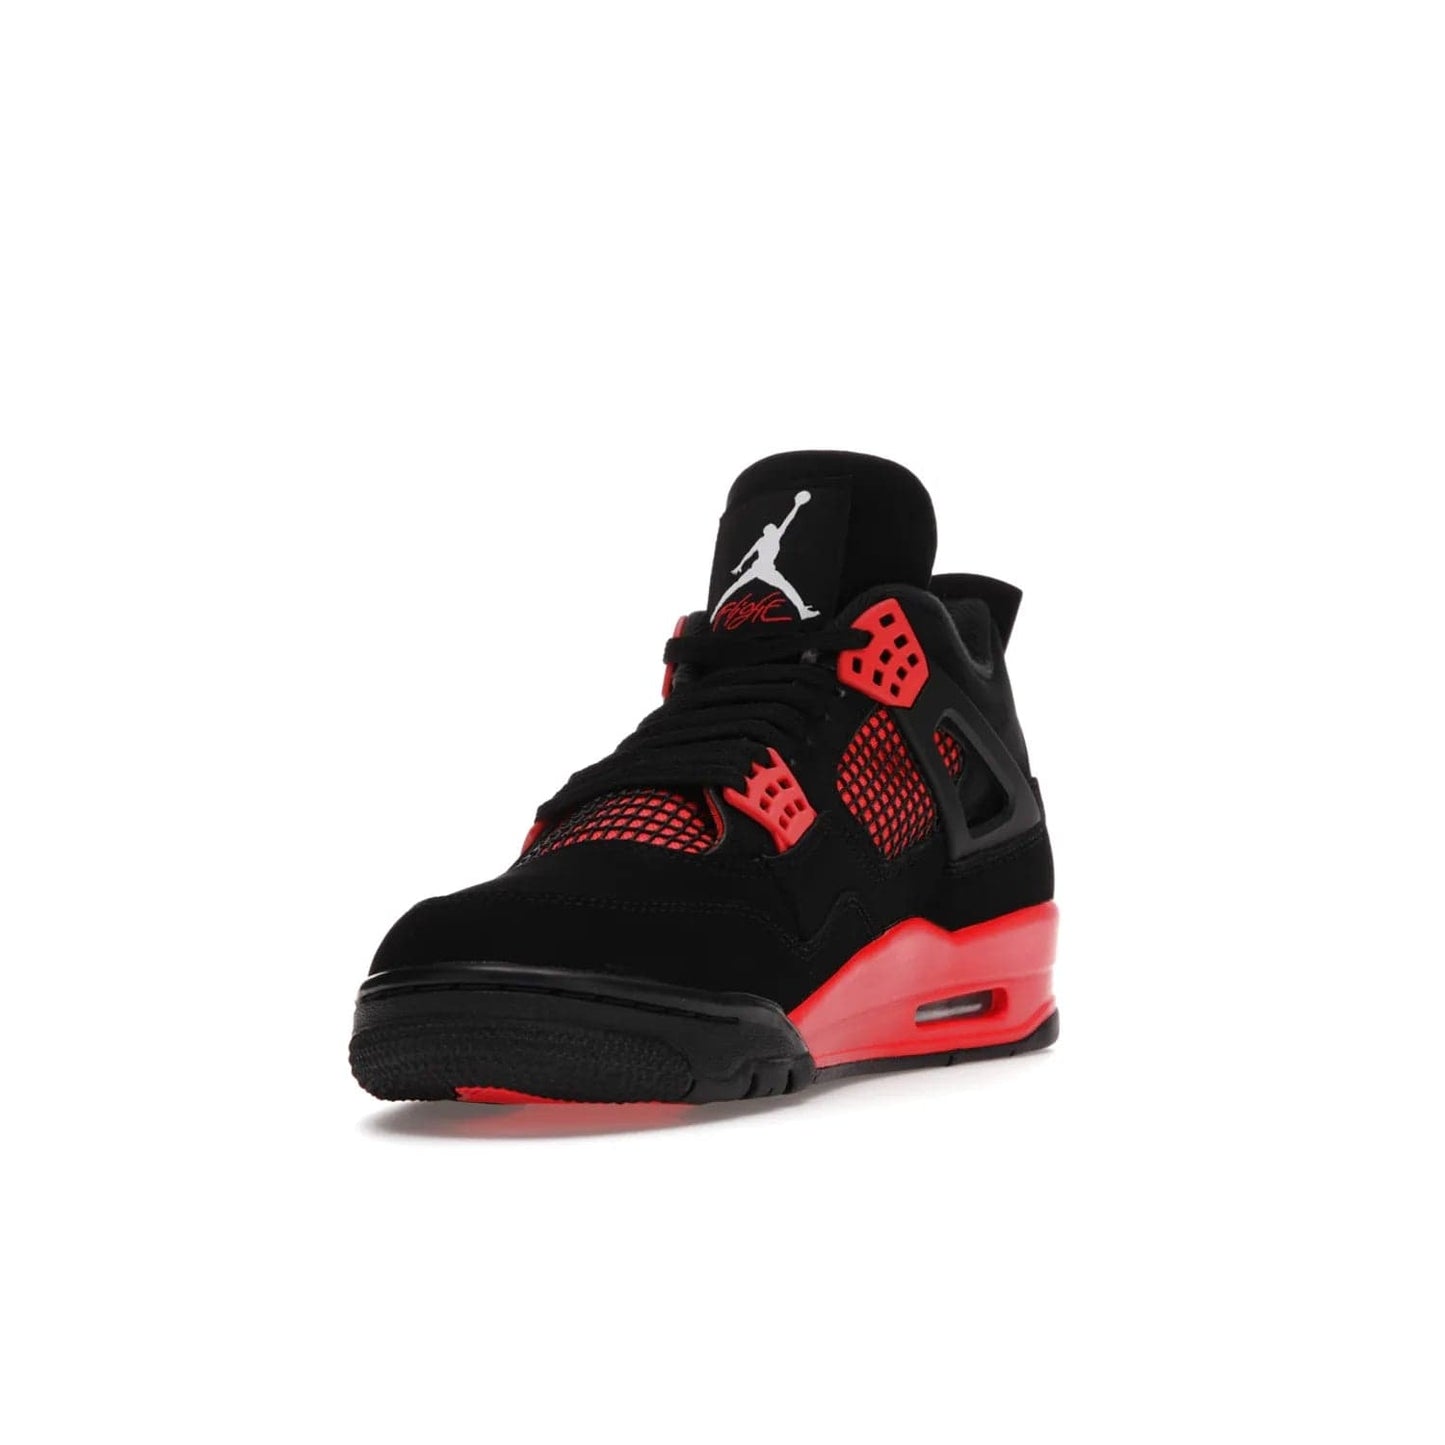 Jordan 4 Retro Red Thunder - Image 13 - Only at www.BallersClubKickz.com - Upscale your footwear with the Air Jordan 4 Retro Red Thunder. Featuring a Durabuck upper, red underlays, signature Flight patch, and vibrant red midsole, this retro sneaker adds style and edge. Releases in January 2022.